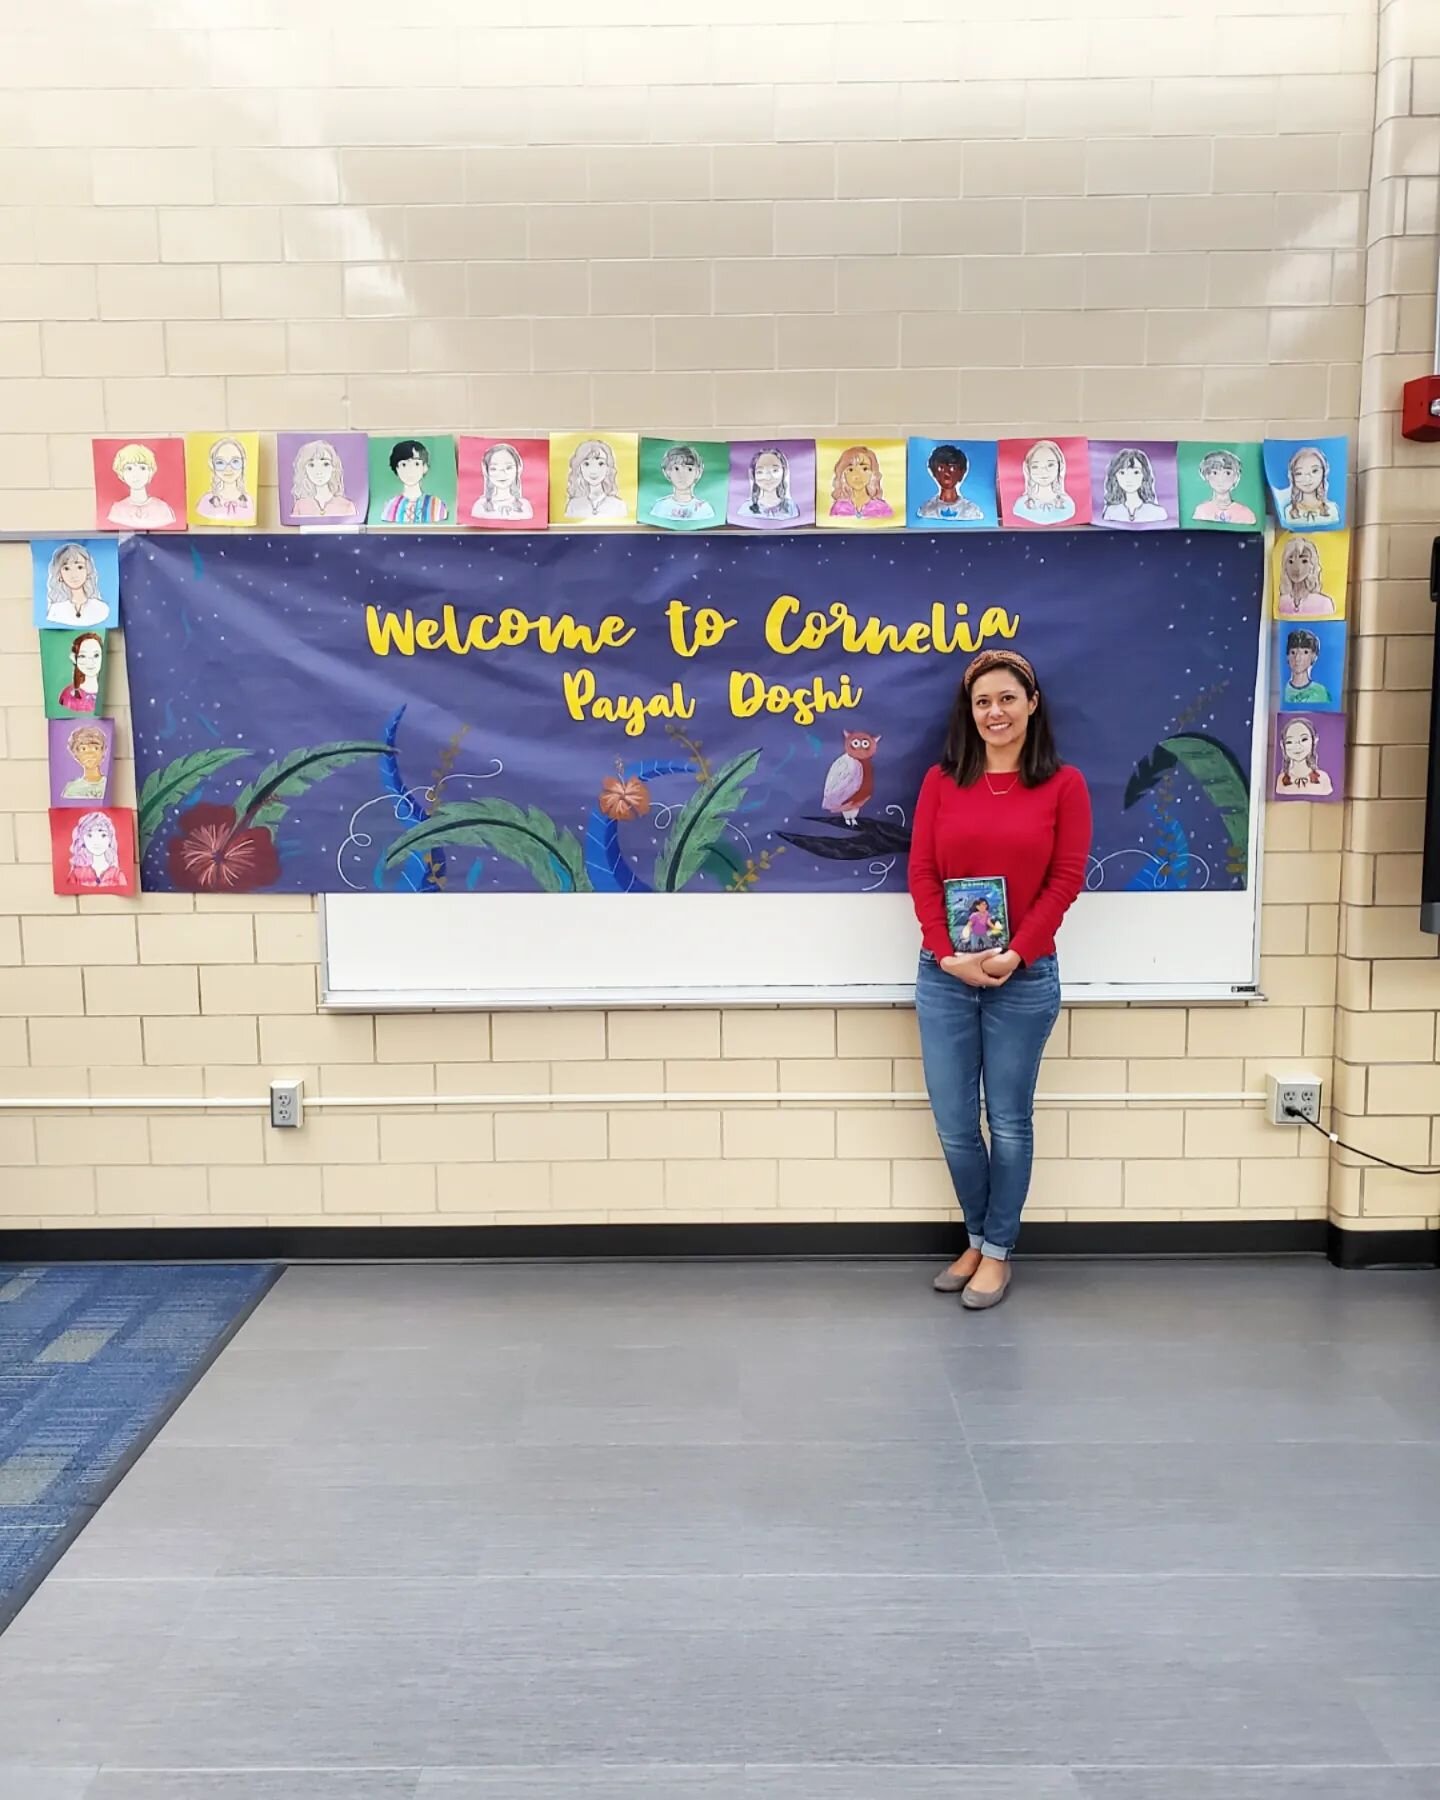 Throwback to one of my absolute favorite school visits right before the school year ended. It was my very first half day visit and I met six classes and had such a wonderful time presenting to the students!

It was soo wonderful to see that gorgeous 